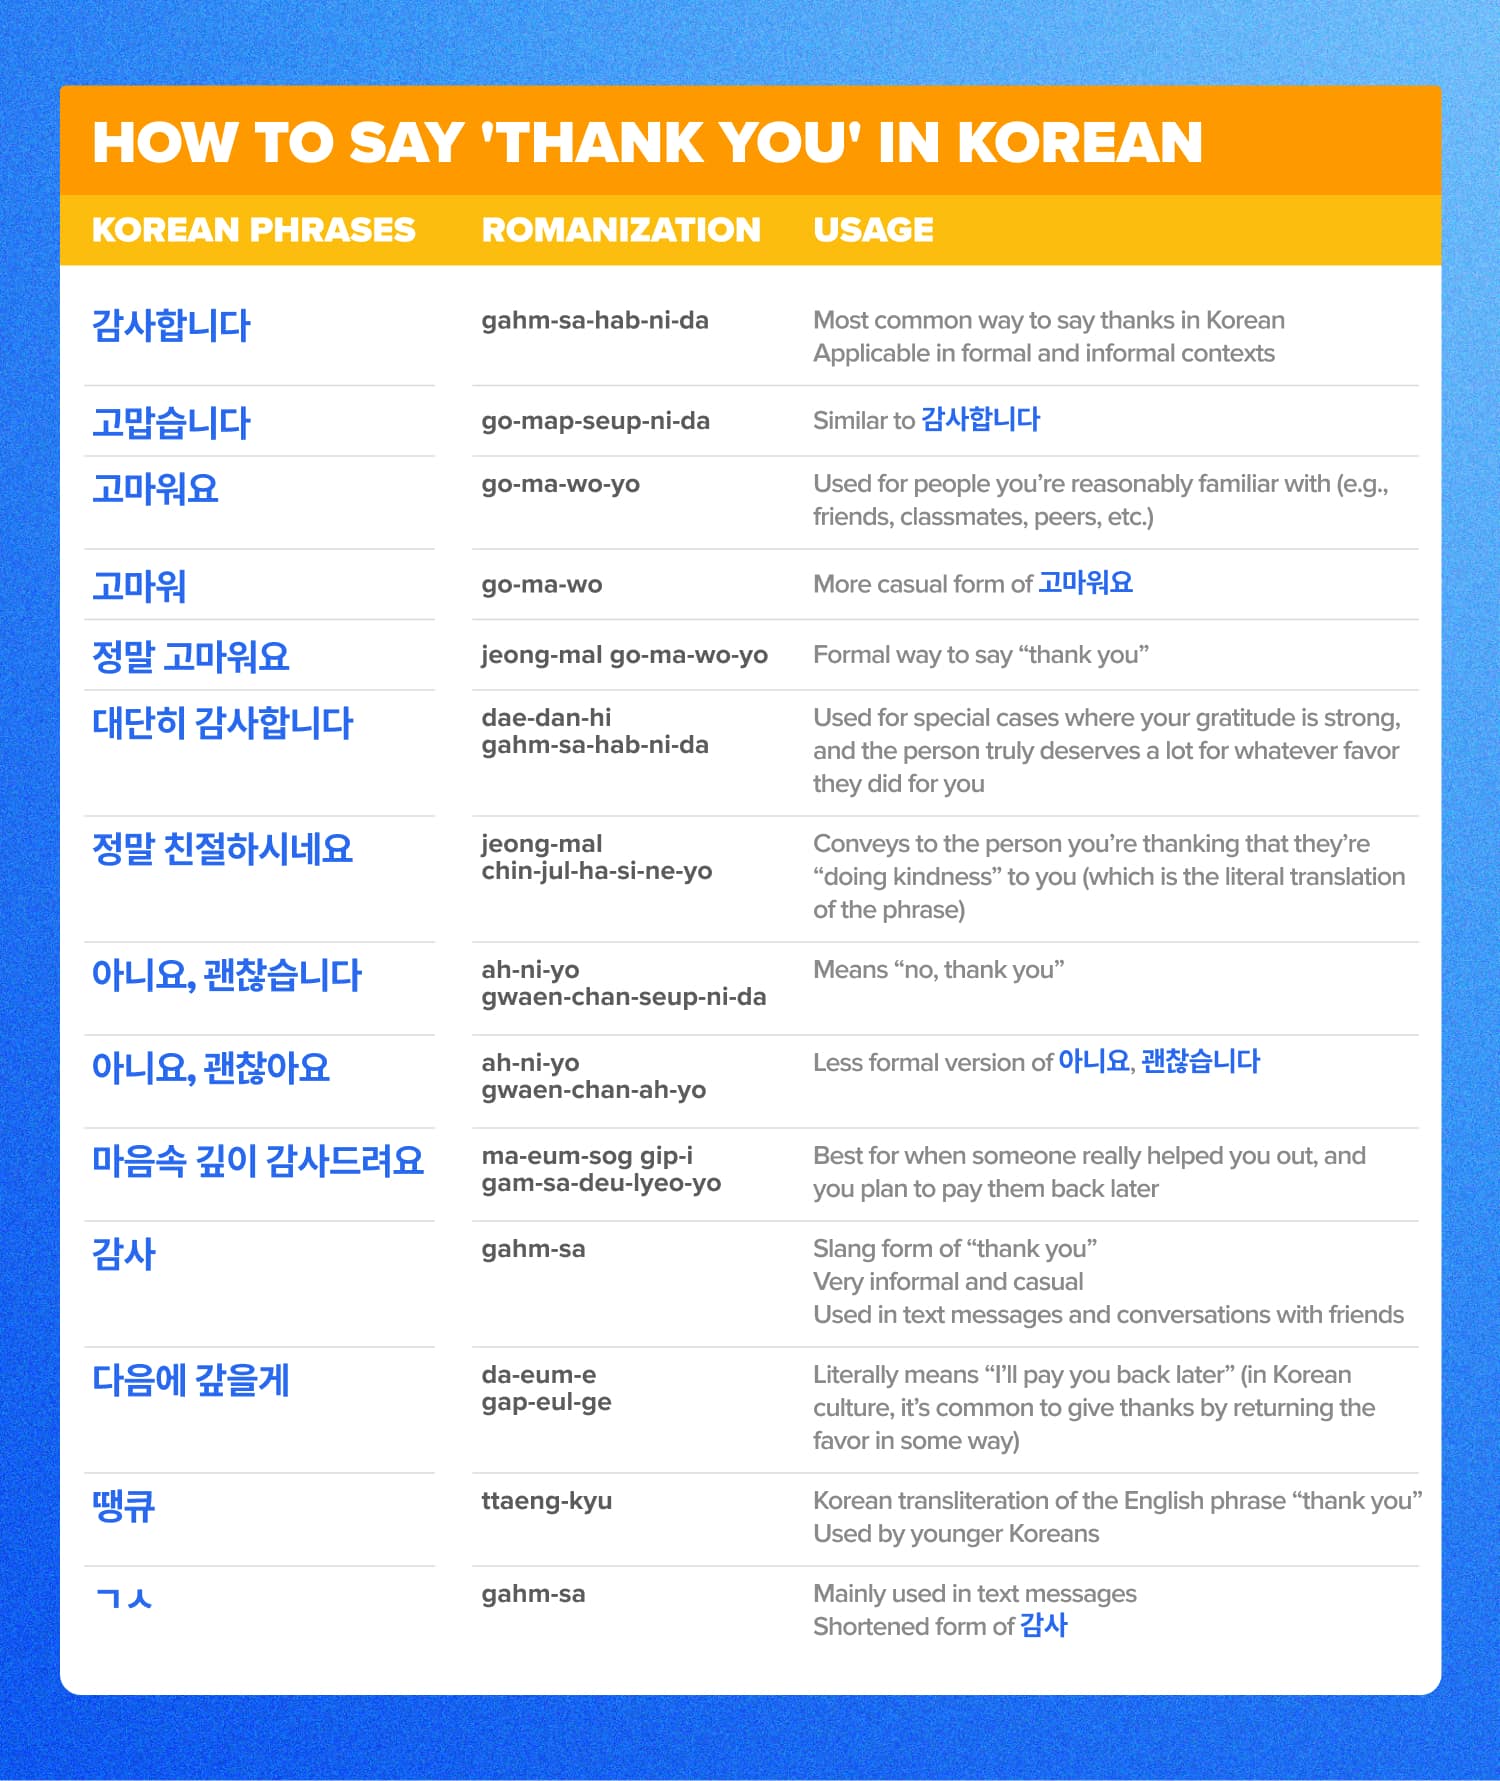 14 Ways to Say “Thank You” in Korean (And 3 Ways to Respond)